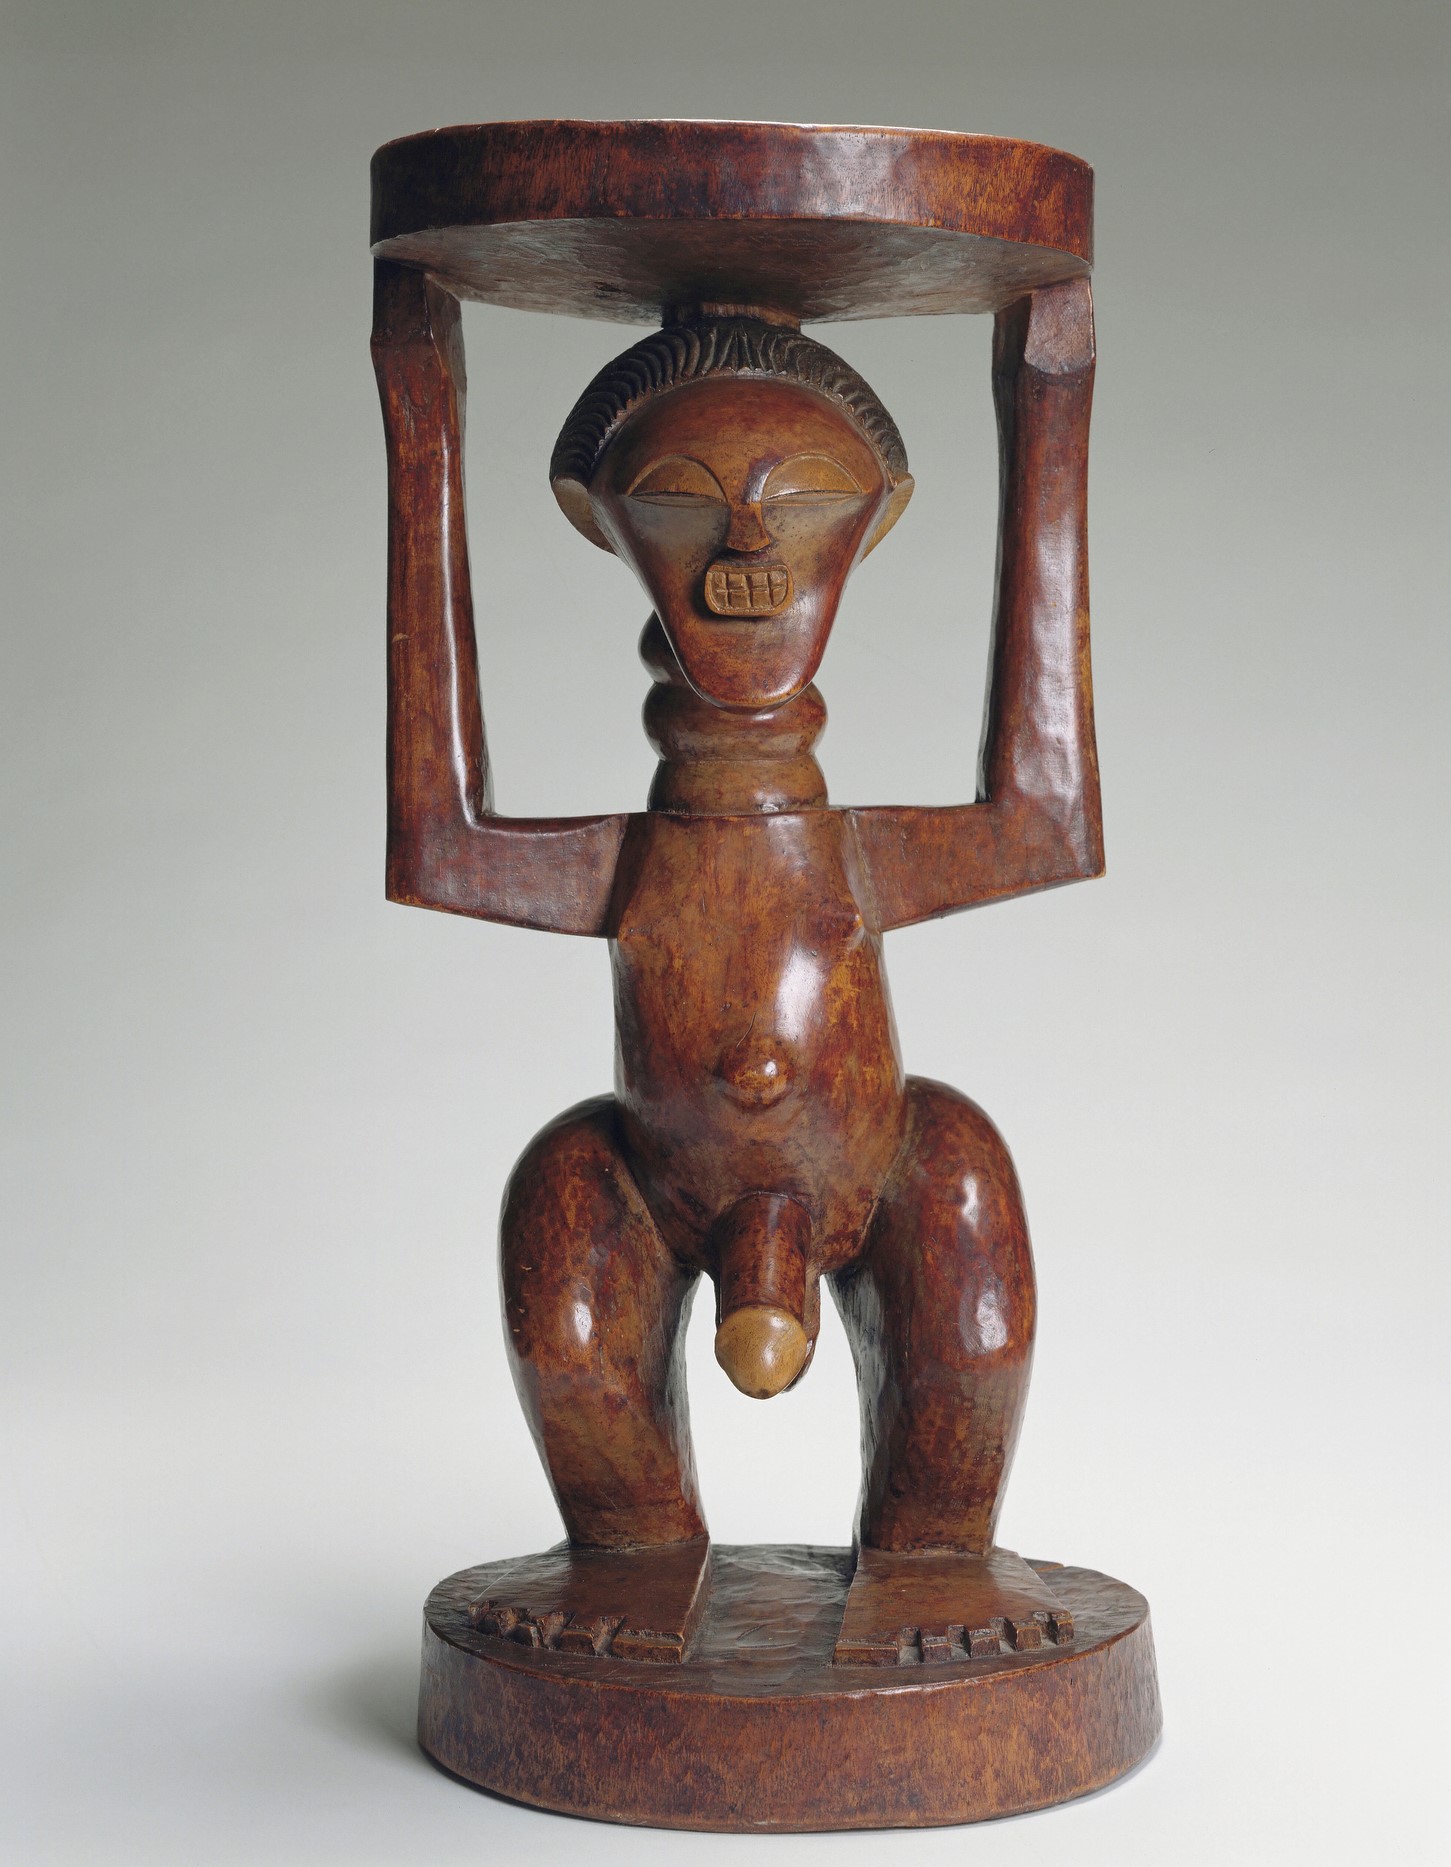 Wooden stool carved in figure of a naked person holding up the seat